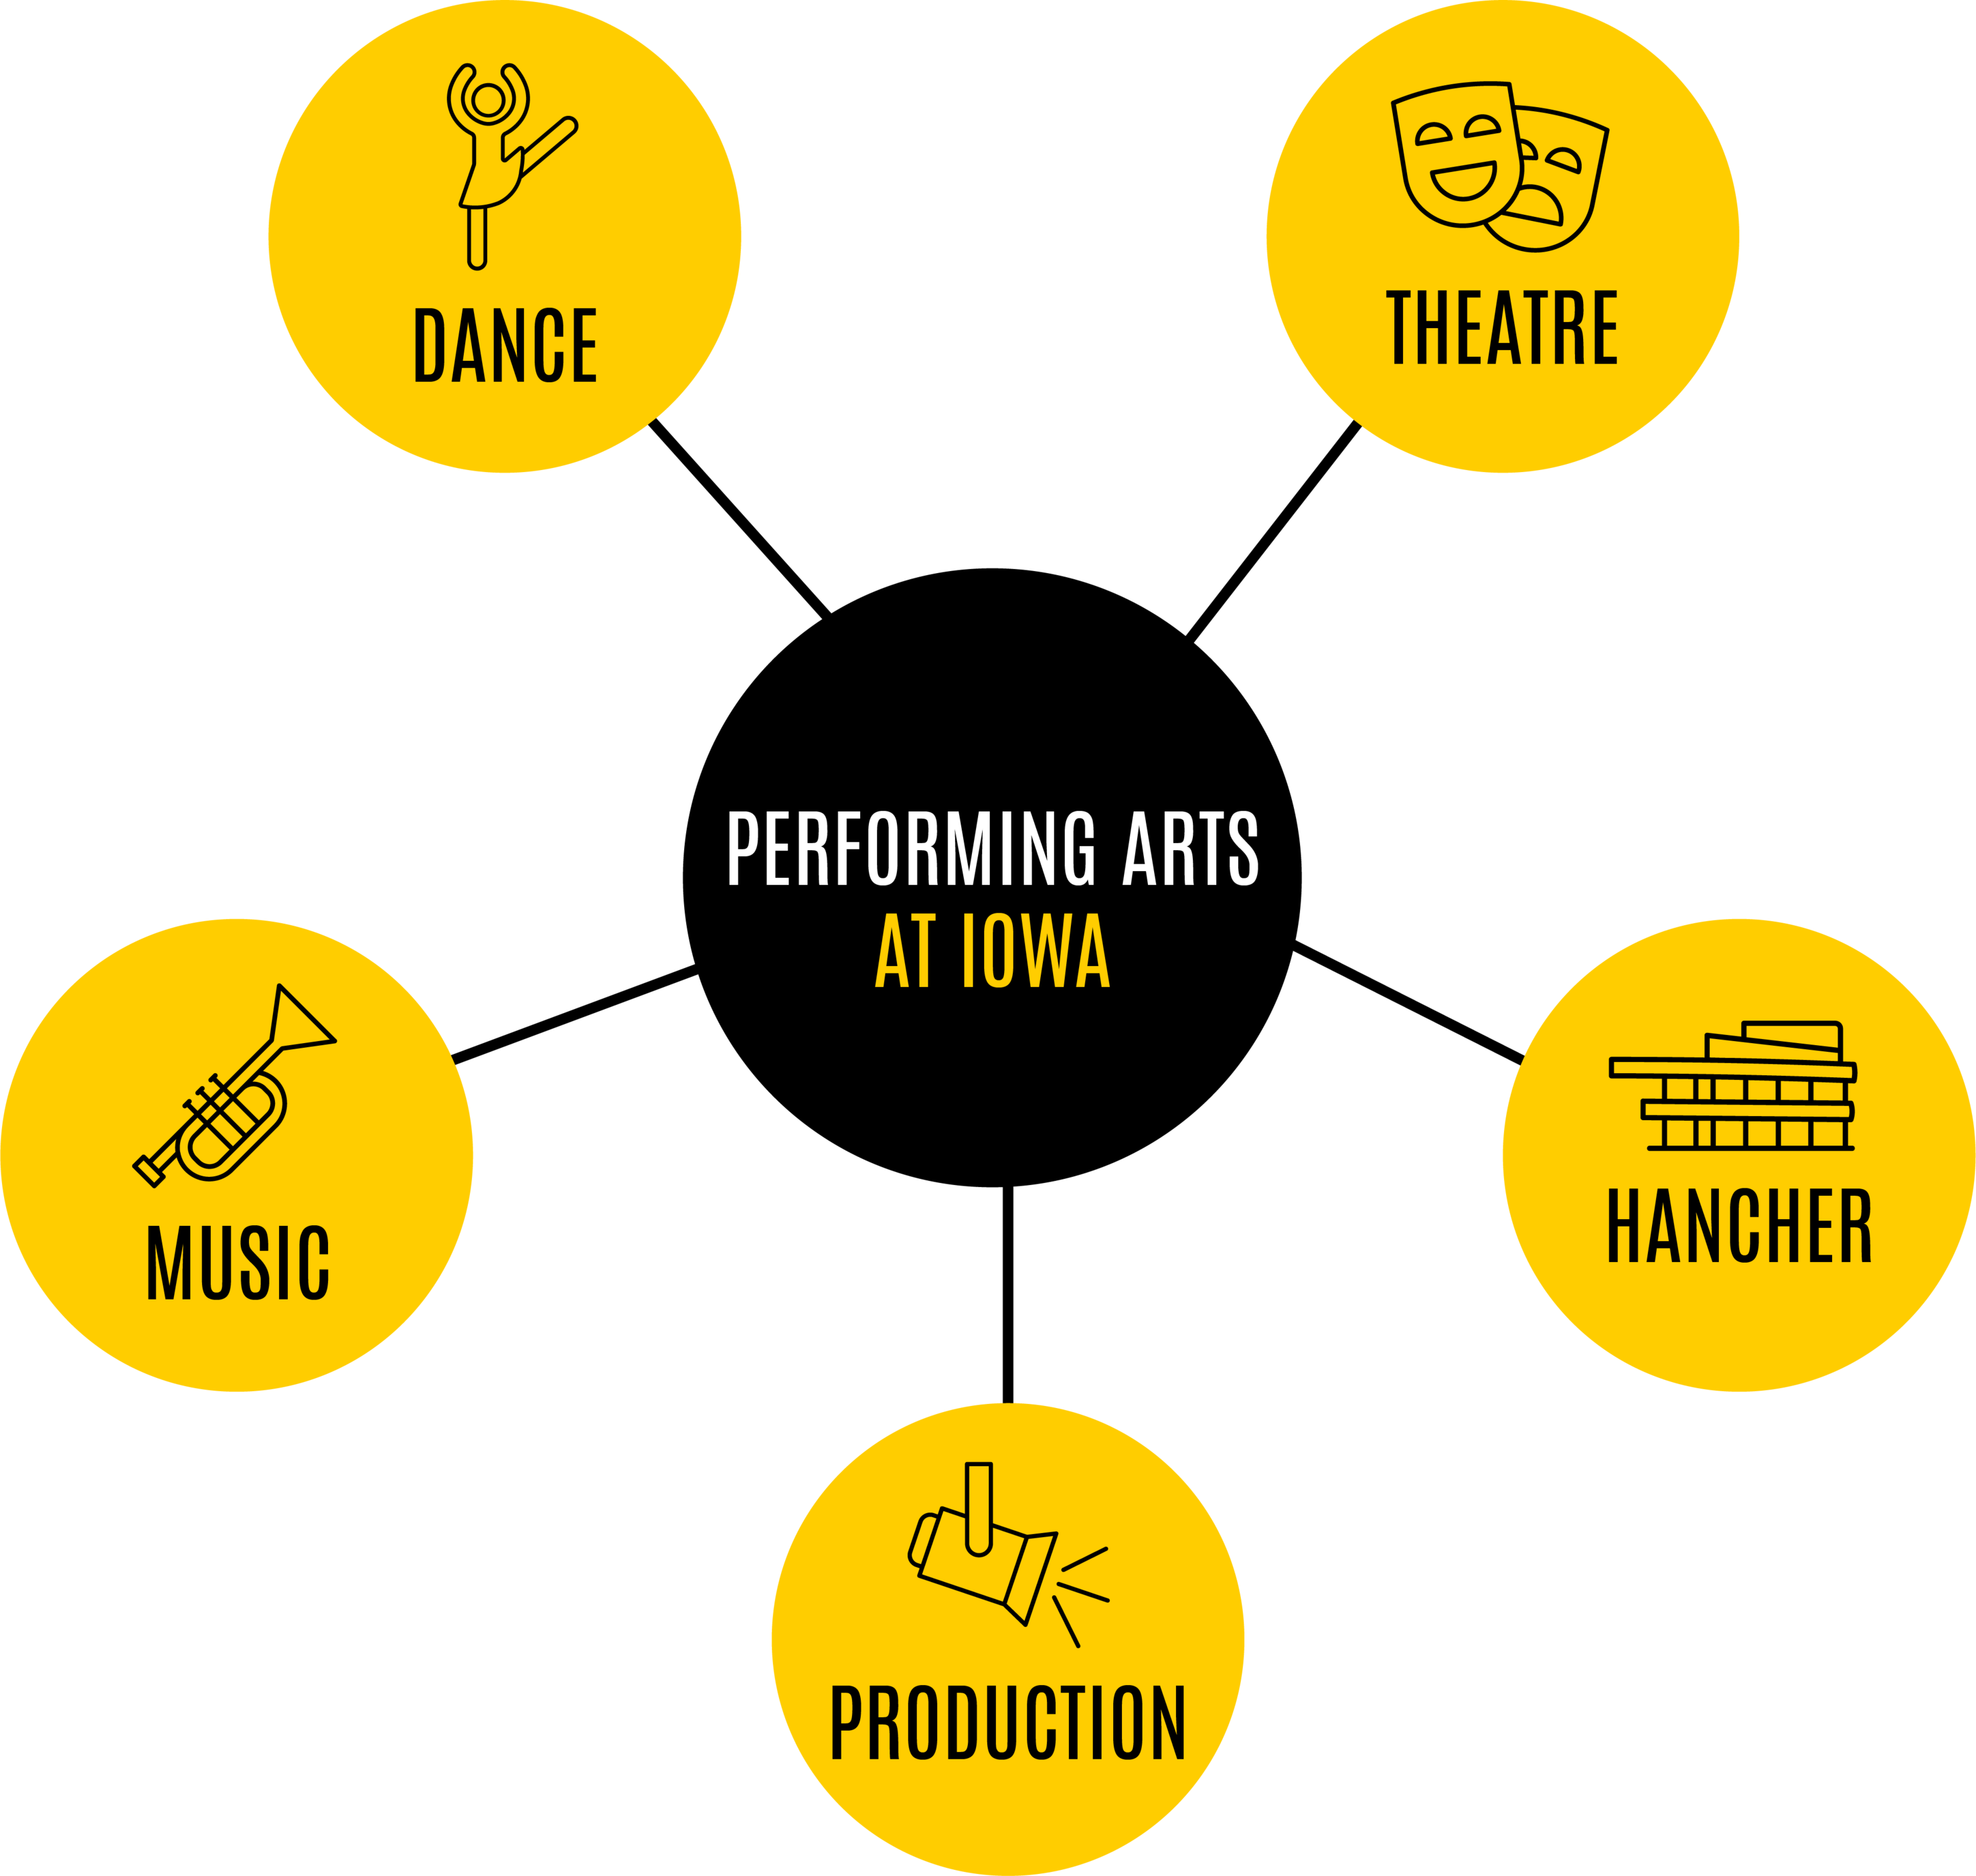 Performing Arts at Iowa is made up of Dance, Theatre, Music, Hancher, and Production